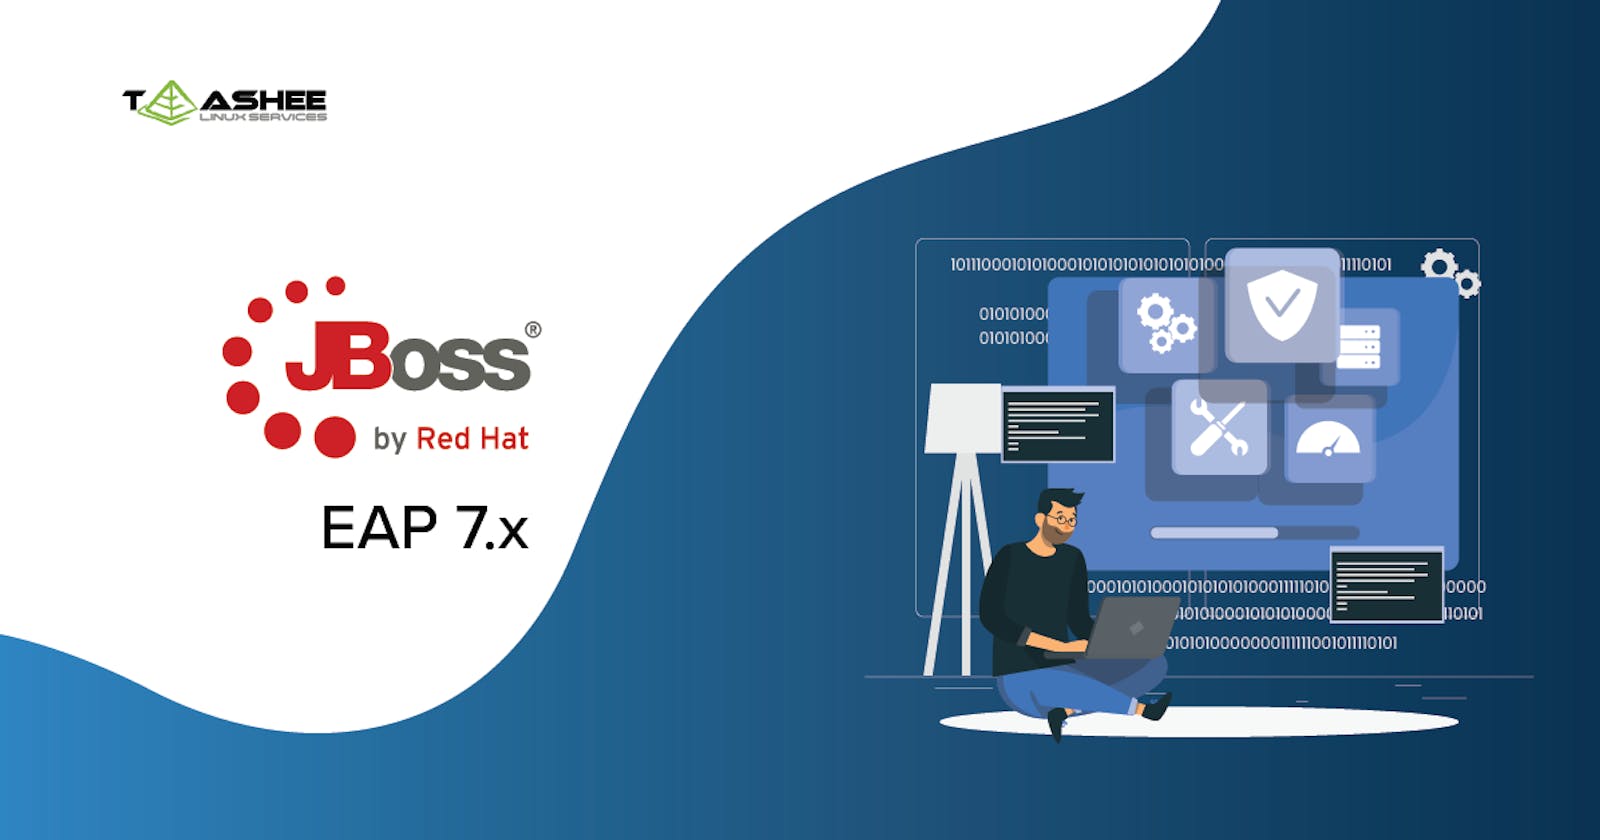 How to Implement JBoss EAP 7.x in Managed Domain Mode in A Few Easy Steps